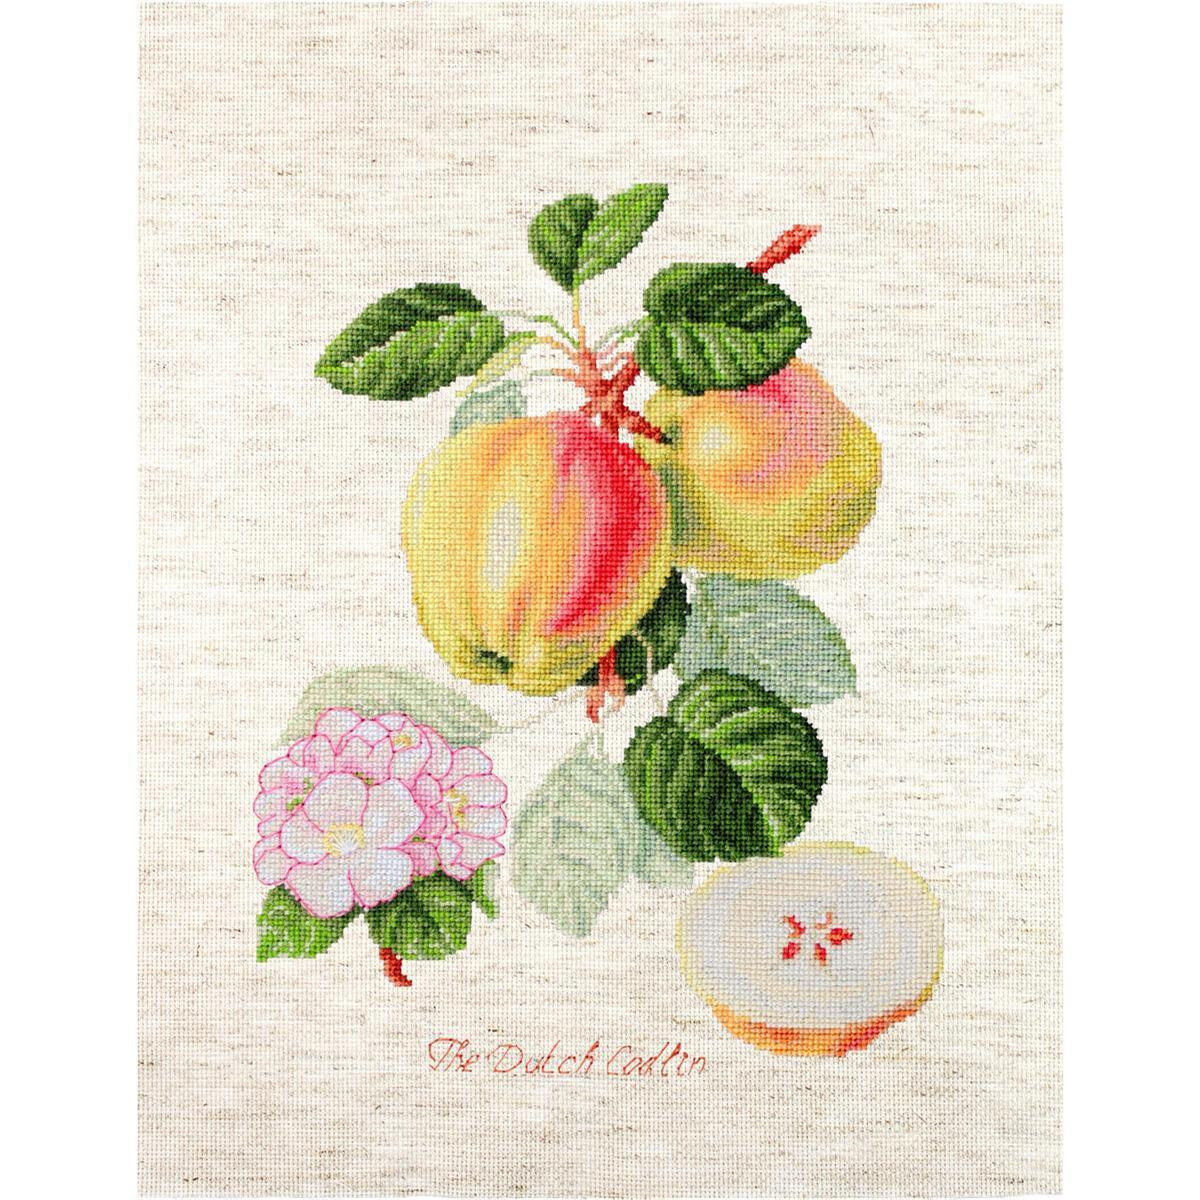 Detailed embroidery pack embroidery depicting two apples...